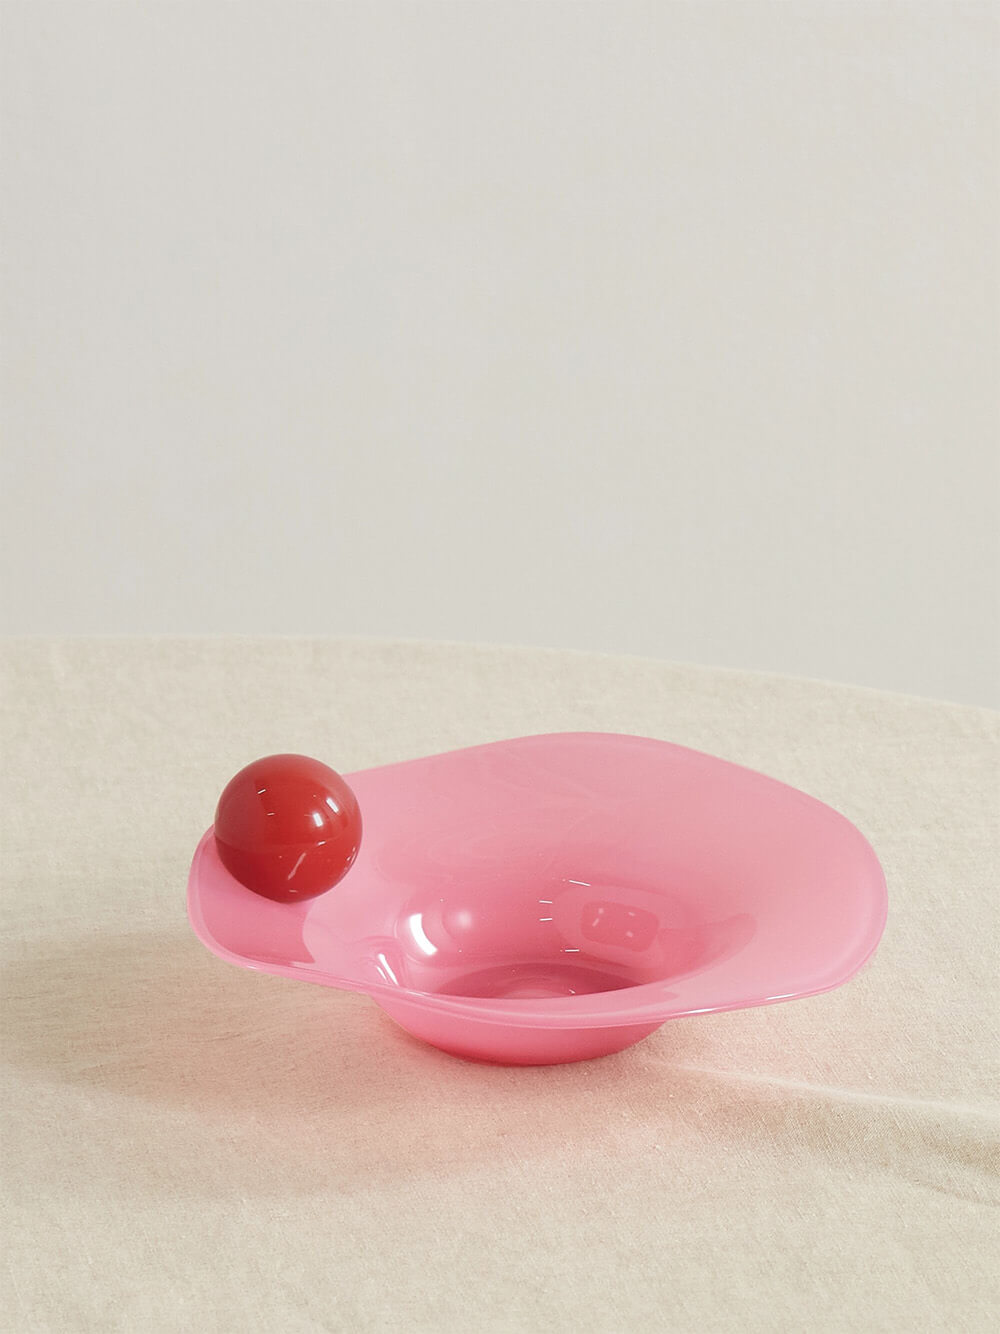 helle mardahl bon bon glass breakfast bowl in red and pink